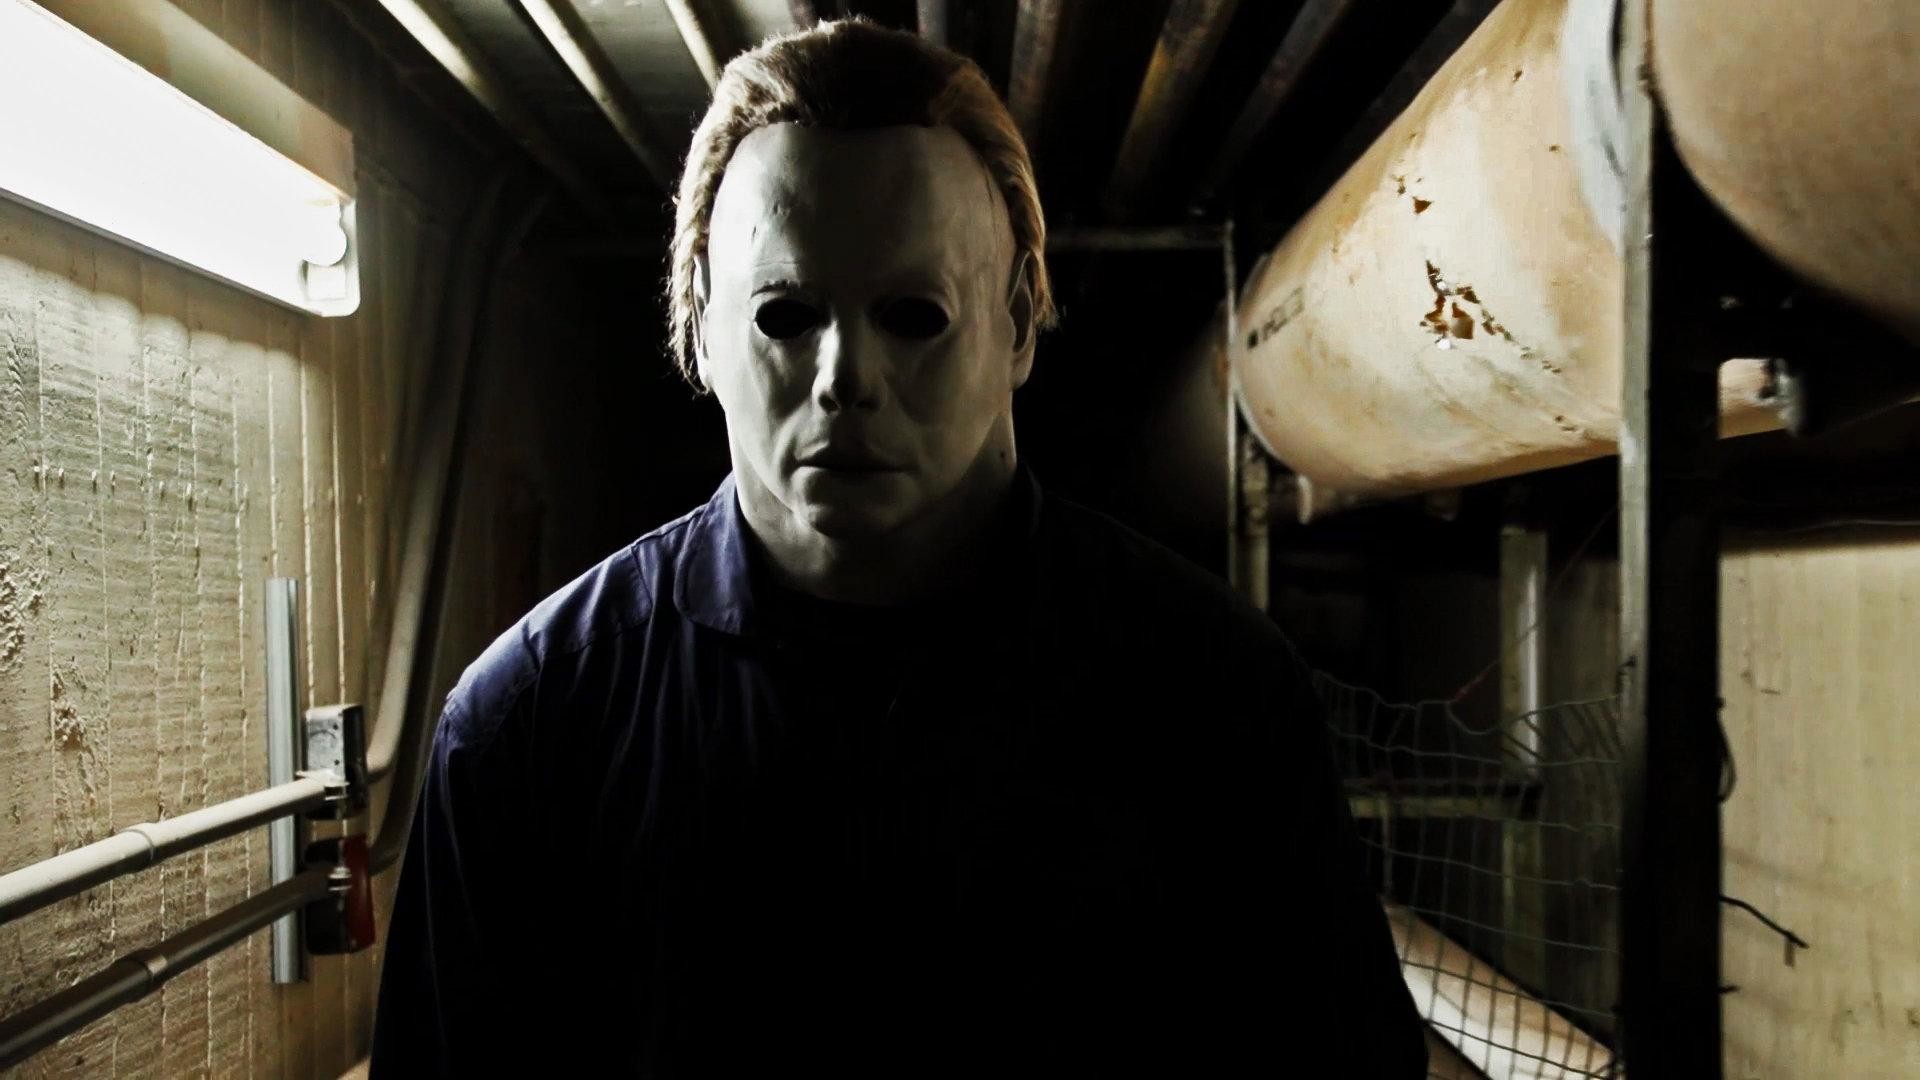 Michael Myers Scare Prank Brings Halloween Early